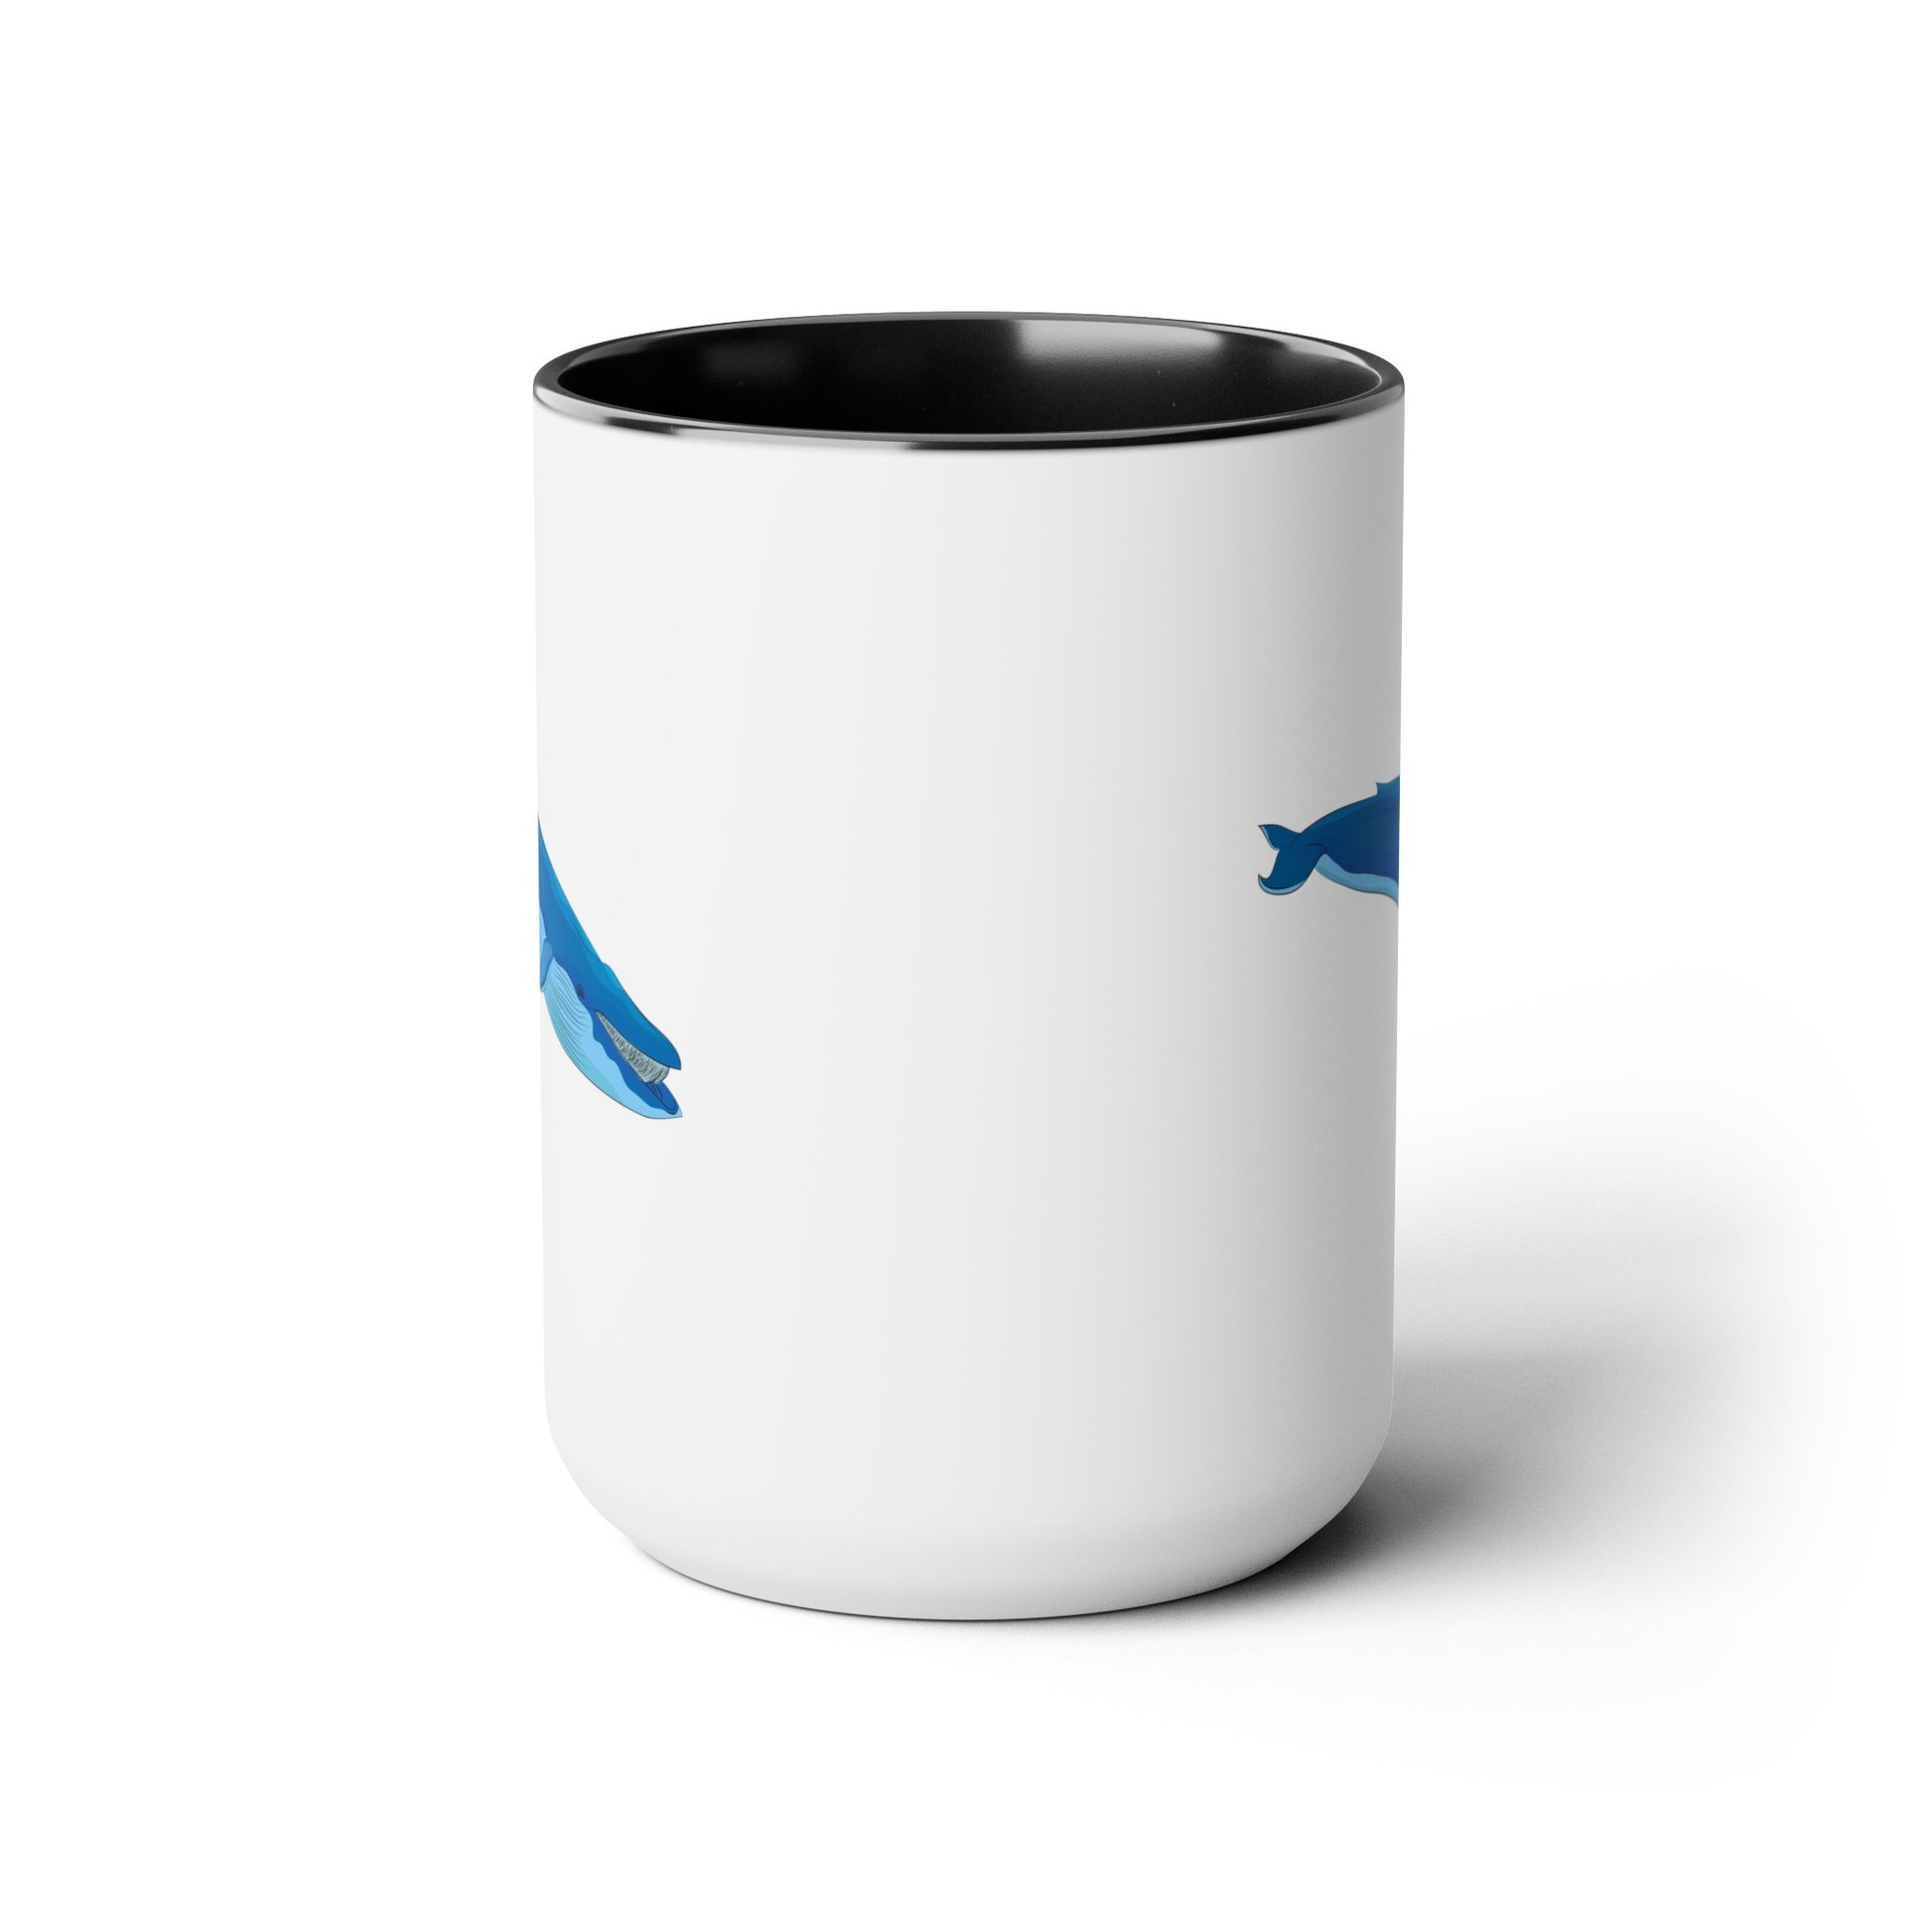 Blue Whale Coffee Mugs - Double Sided Black Accent White Ceramic 15oz by TheGlassyLass.com